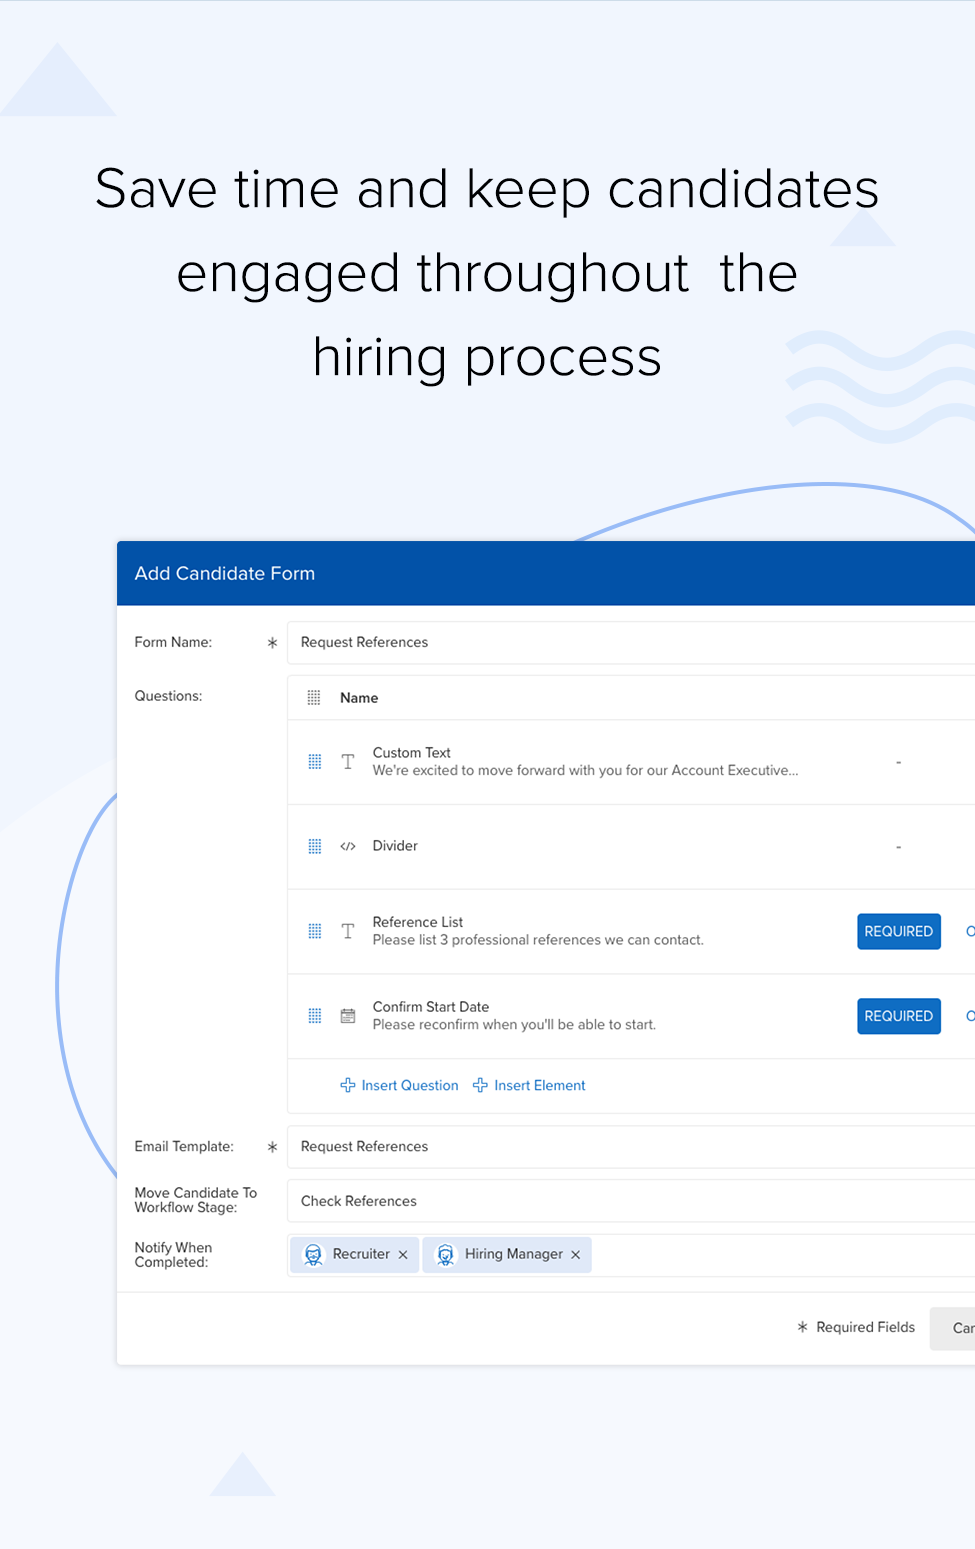 Save time and keep candidates engaged throughout the hiring process | mobile recruiting software forms